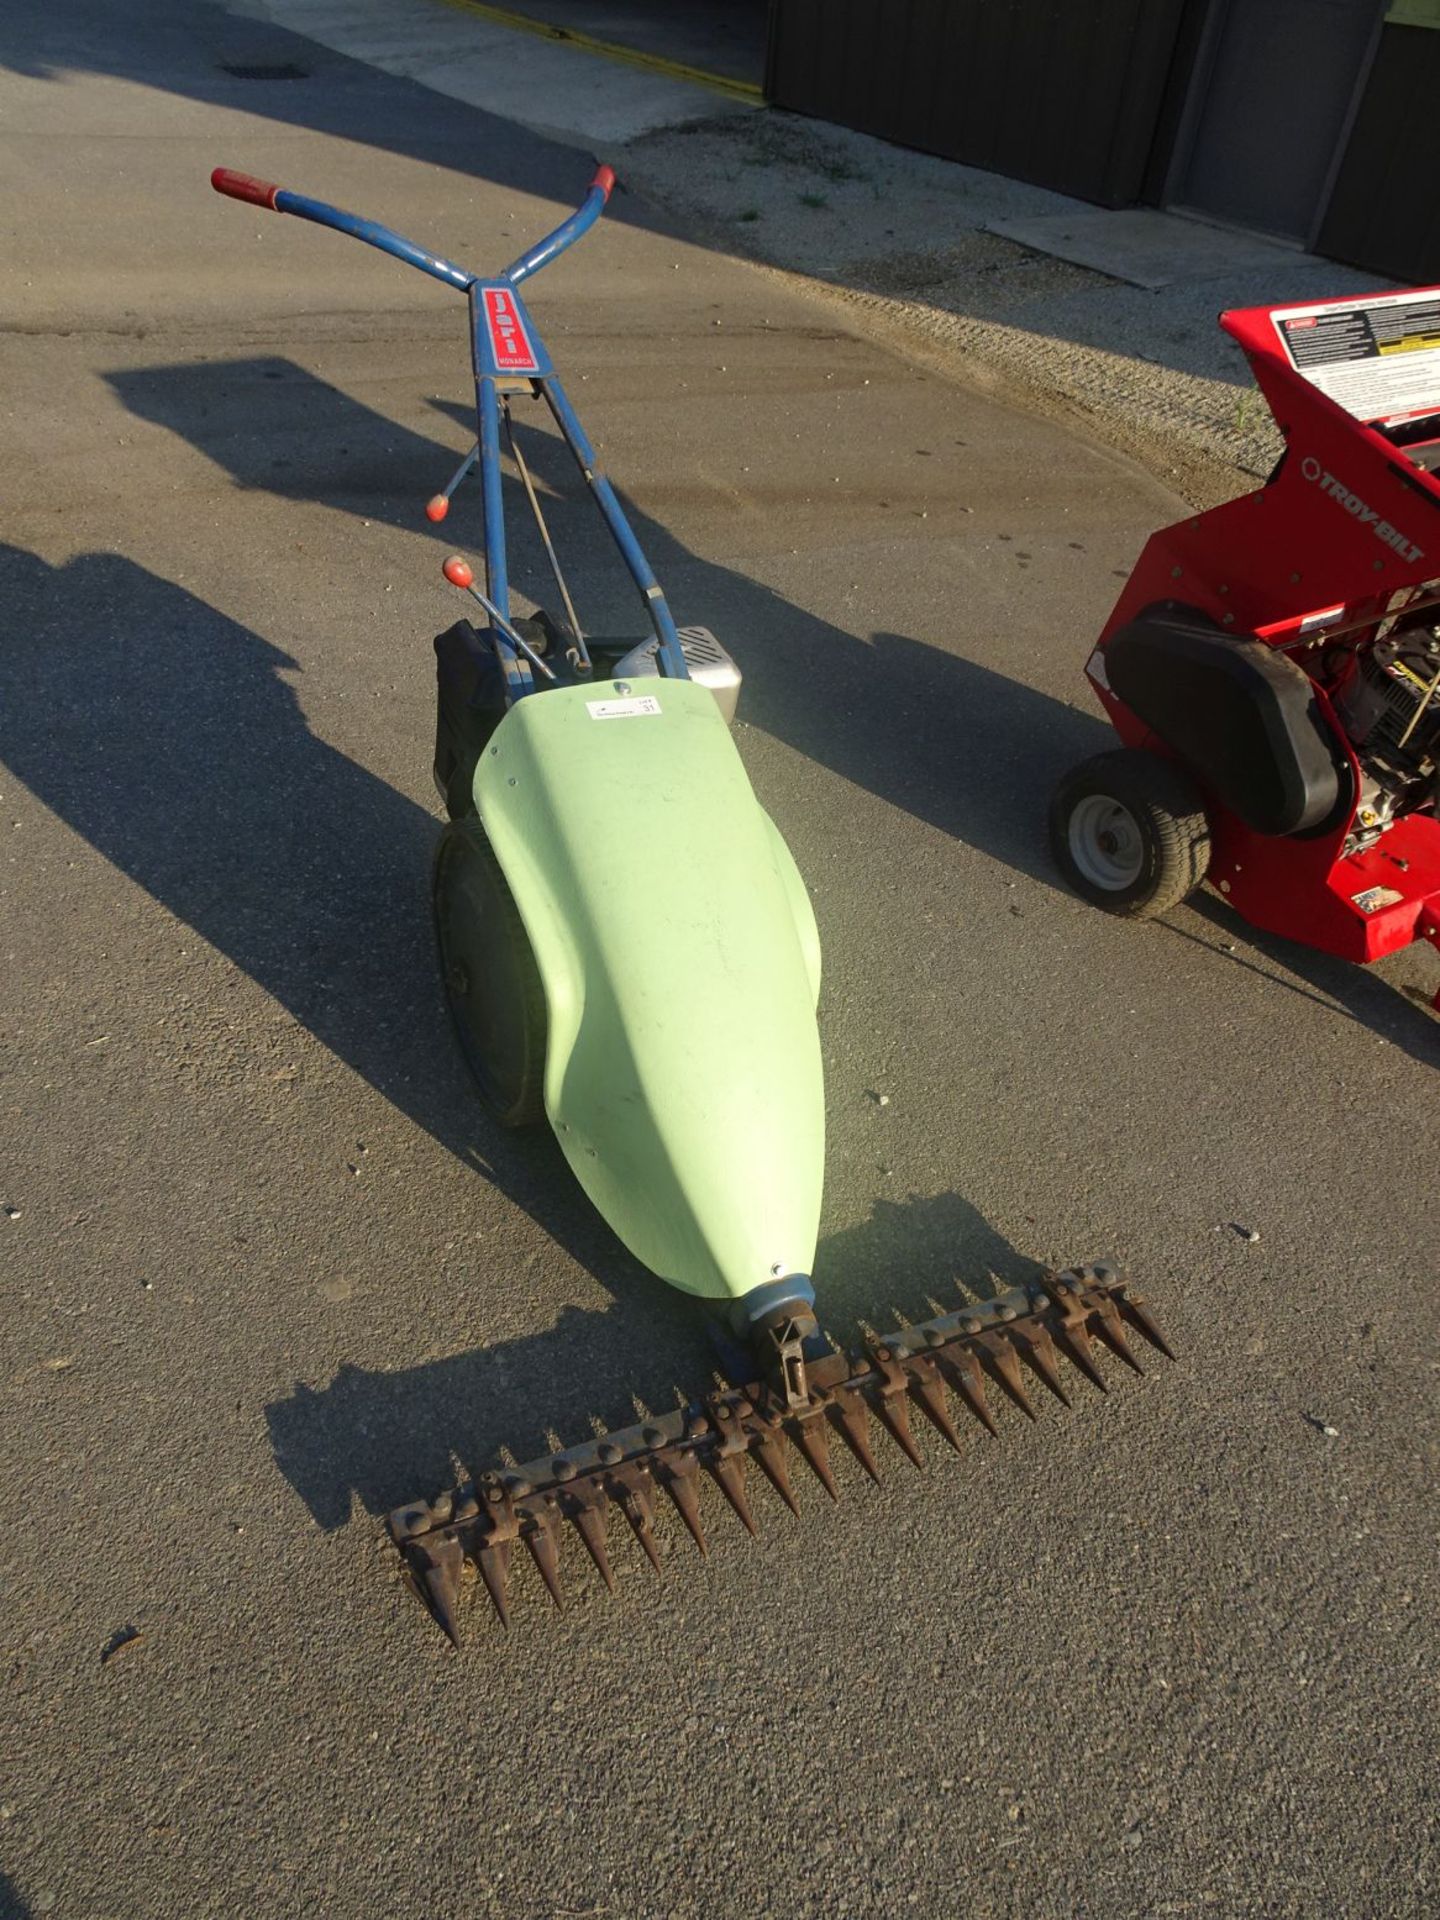 Jari Monarch 30" Sickle Bar Mower With Briggs and Stratton Intek Series 206 5.5hp OHV Motor - Image 2 of 5